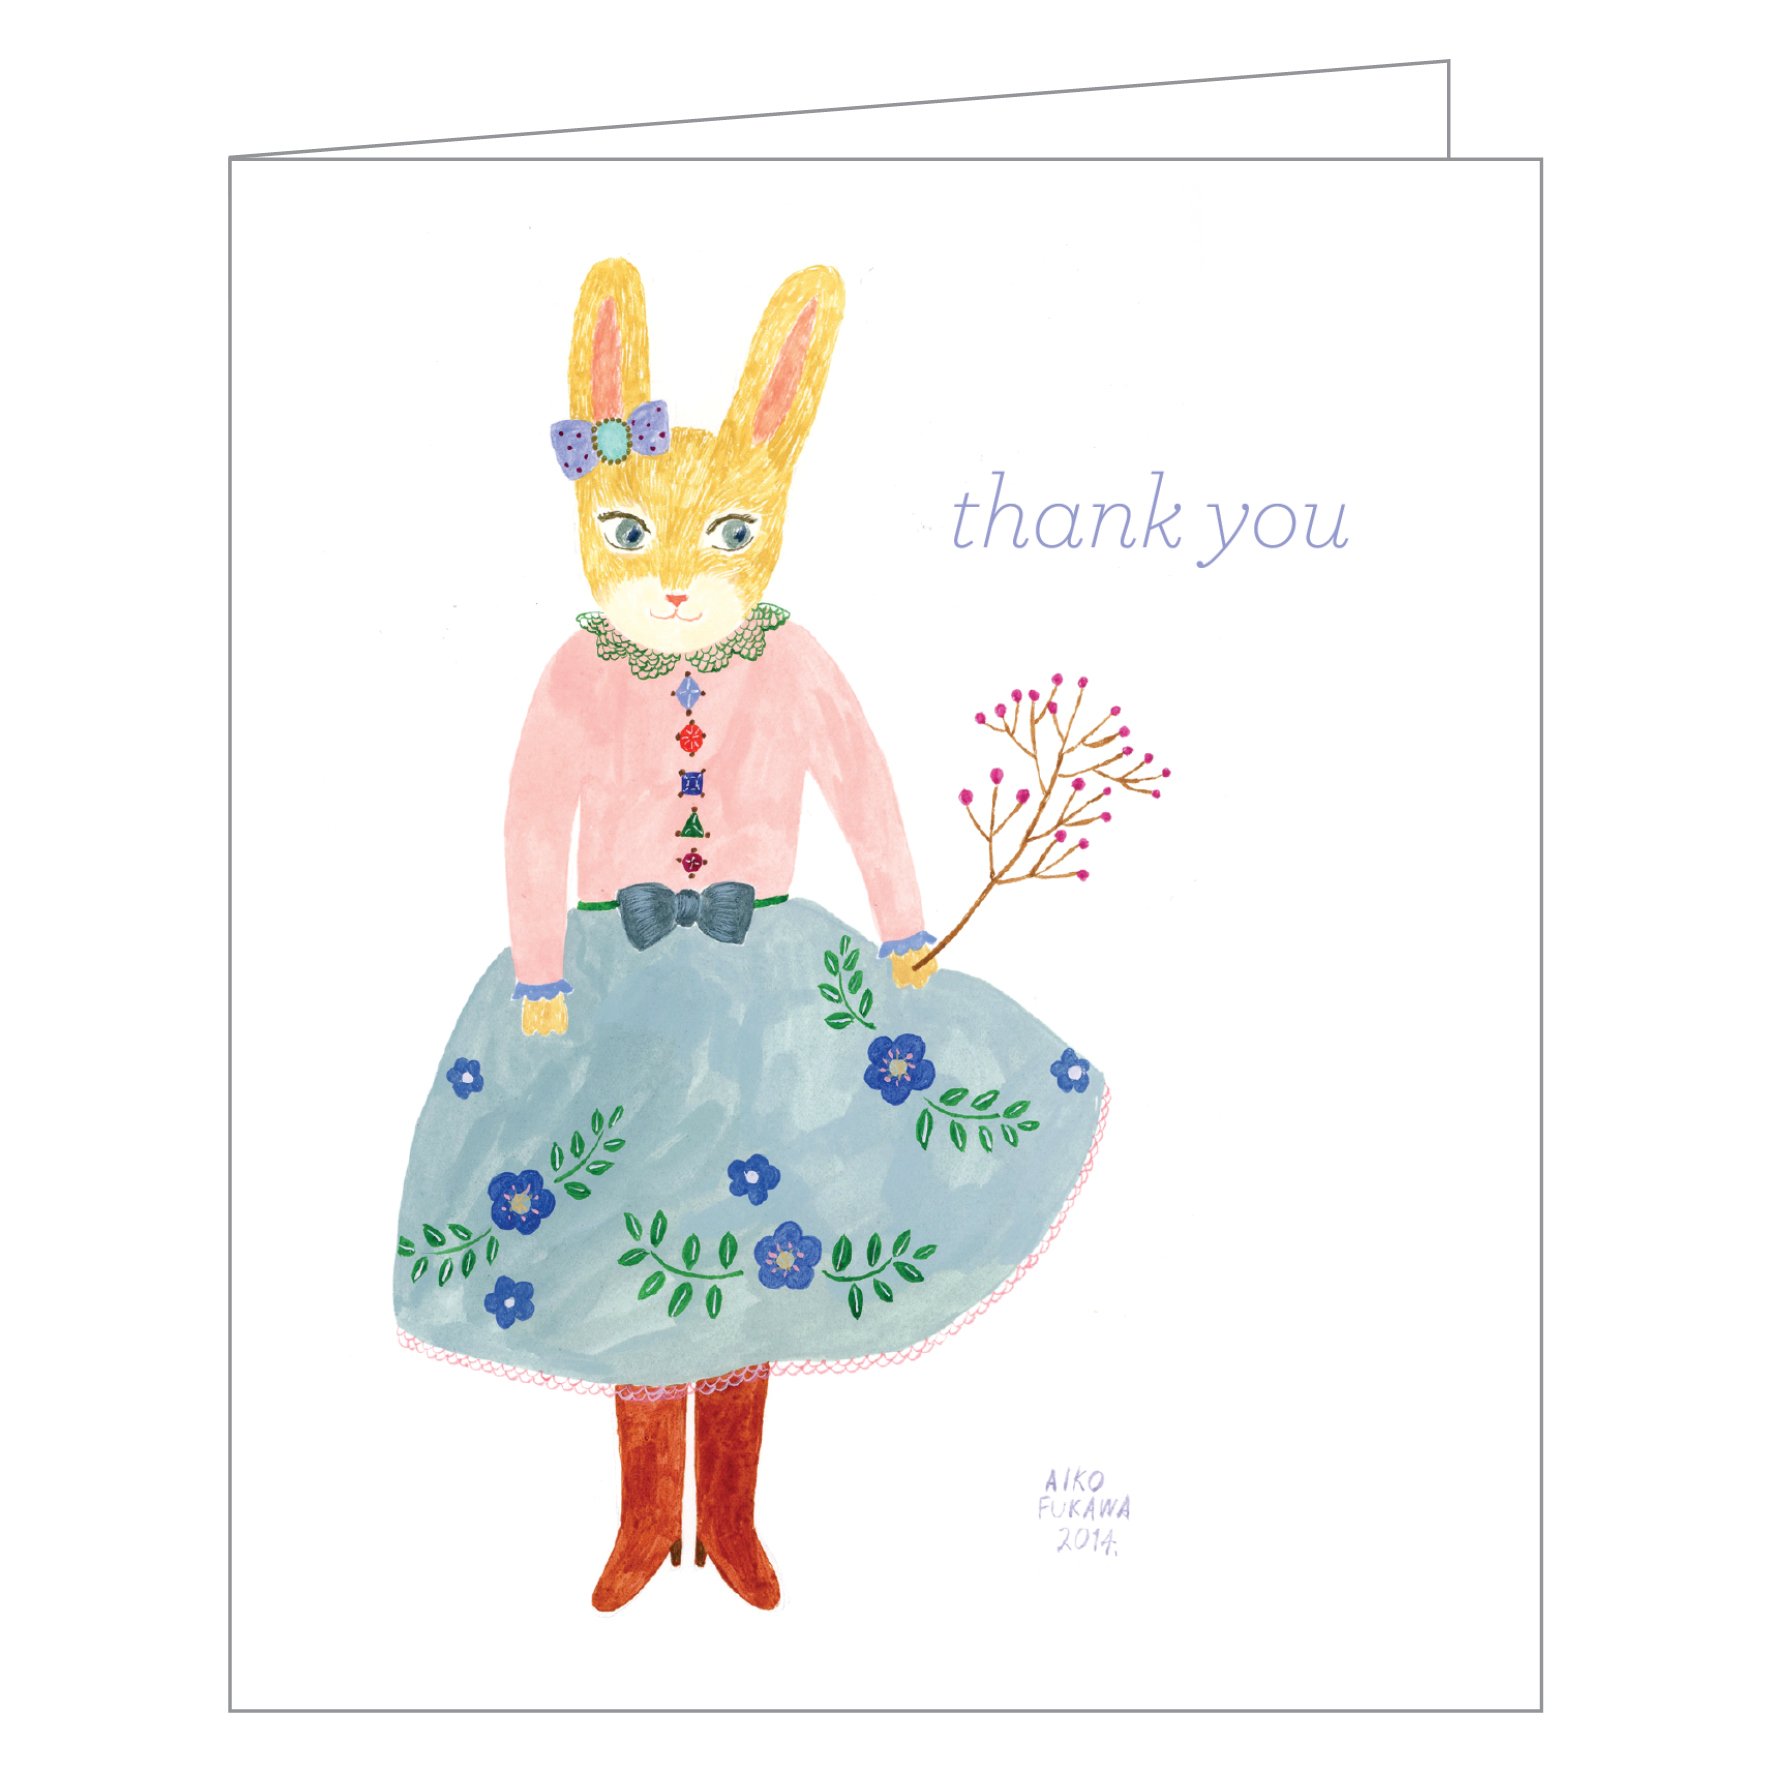 Aiko Fukawa's cute bunny dressed in skirt and cardigan design, to 'thank you' notecard box, by teNeues' Stationery.